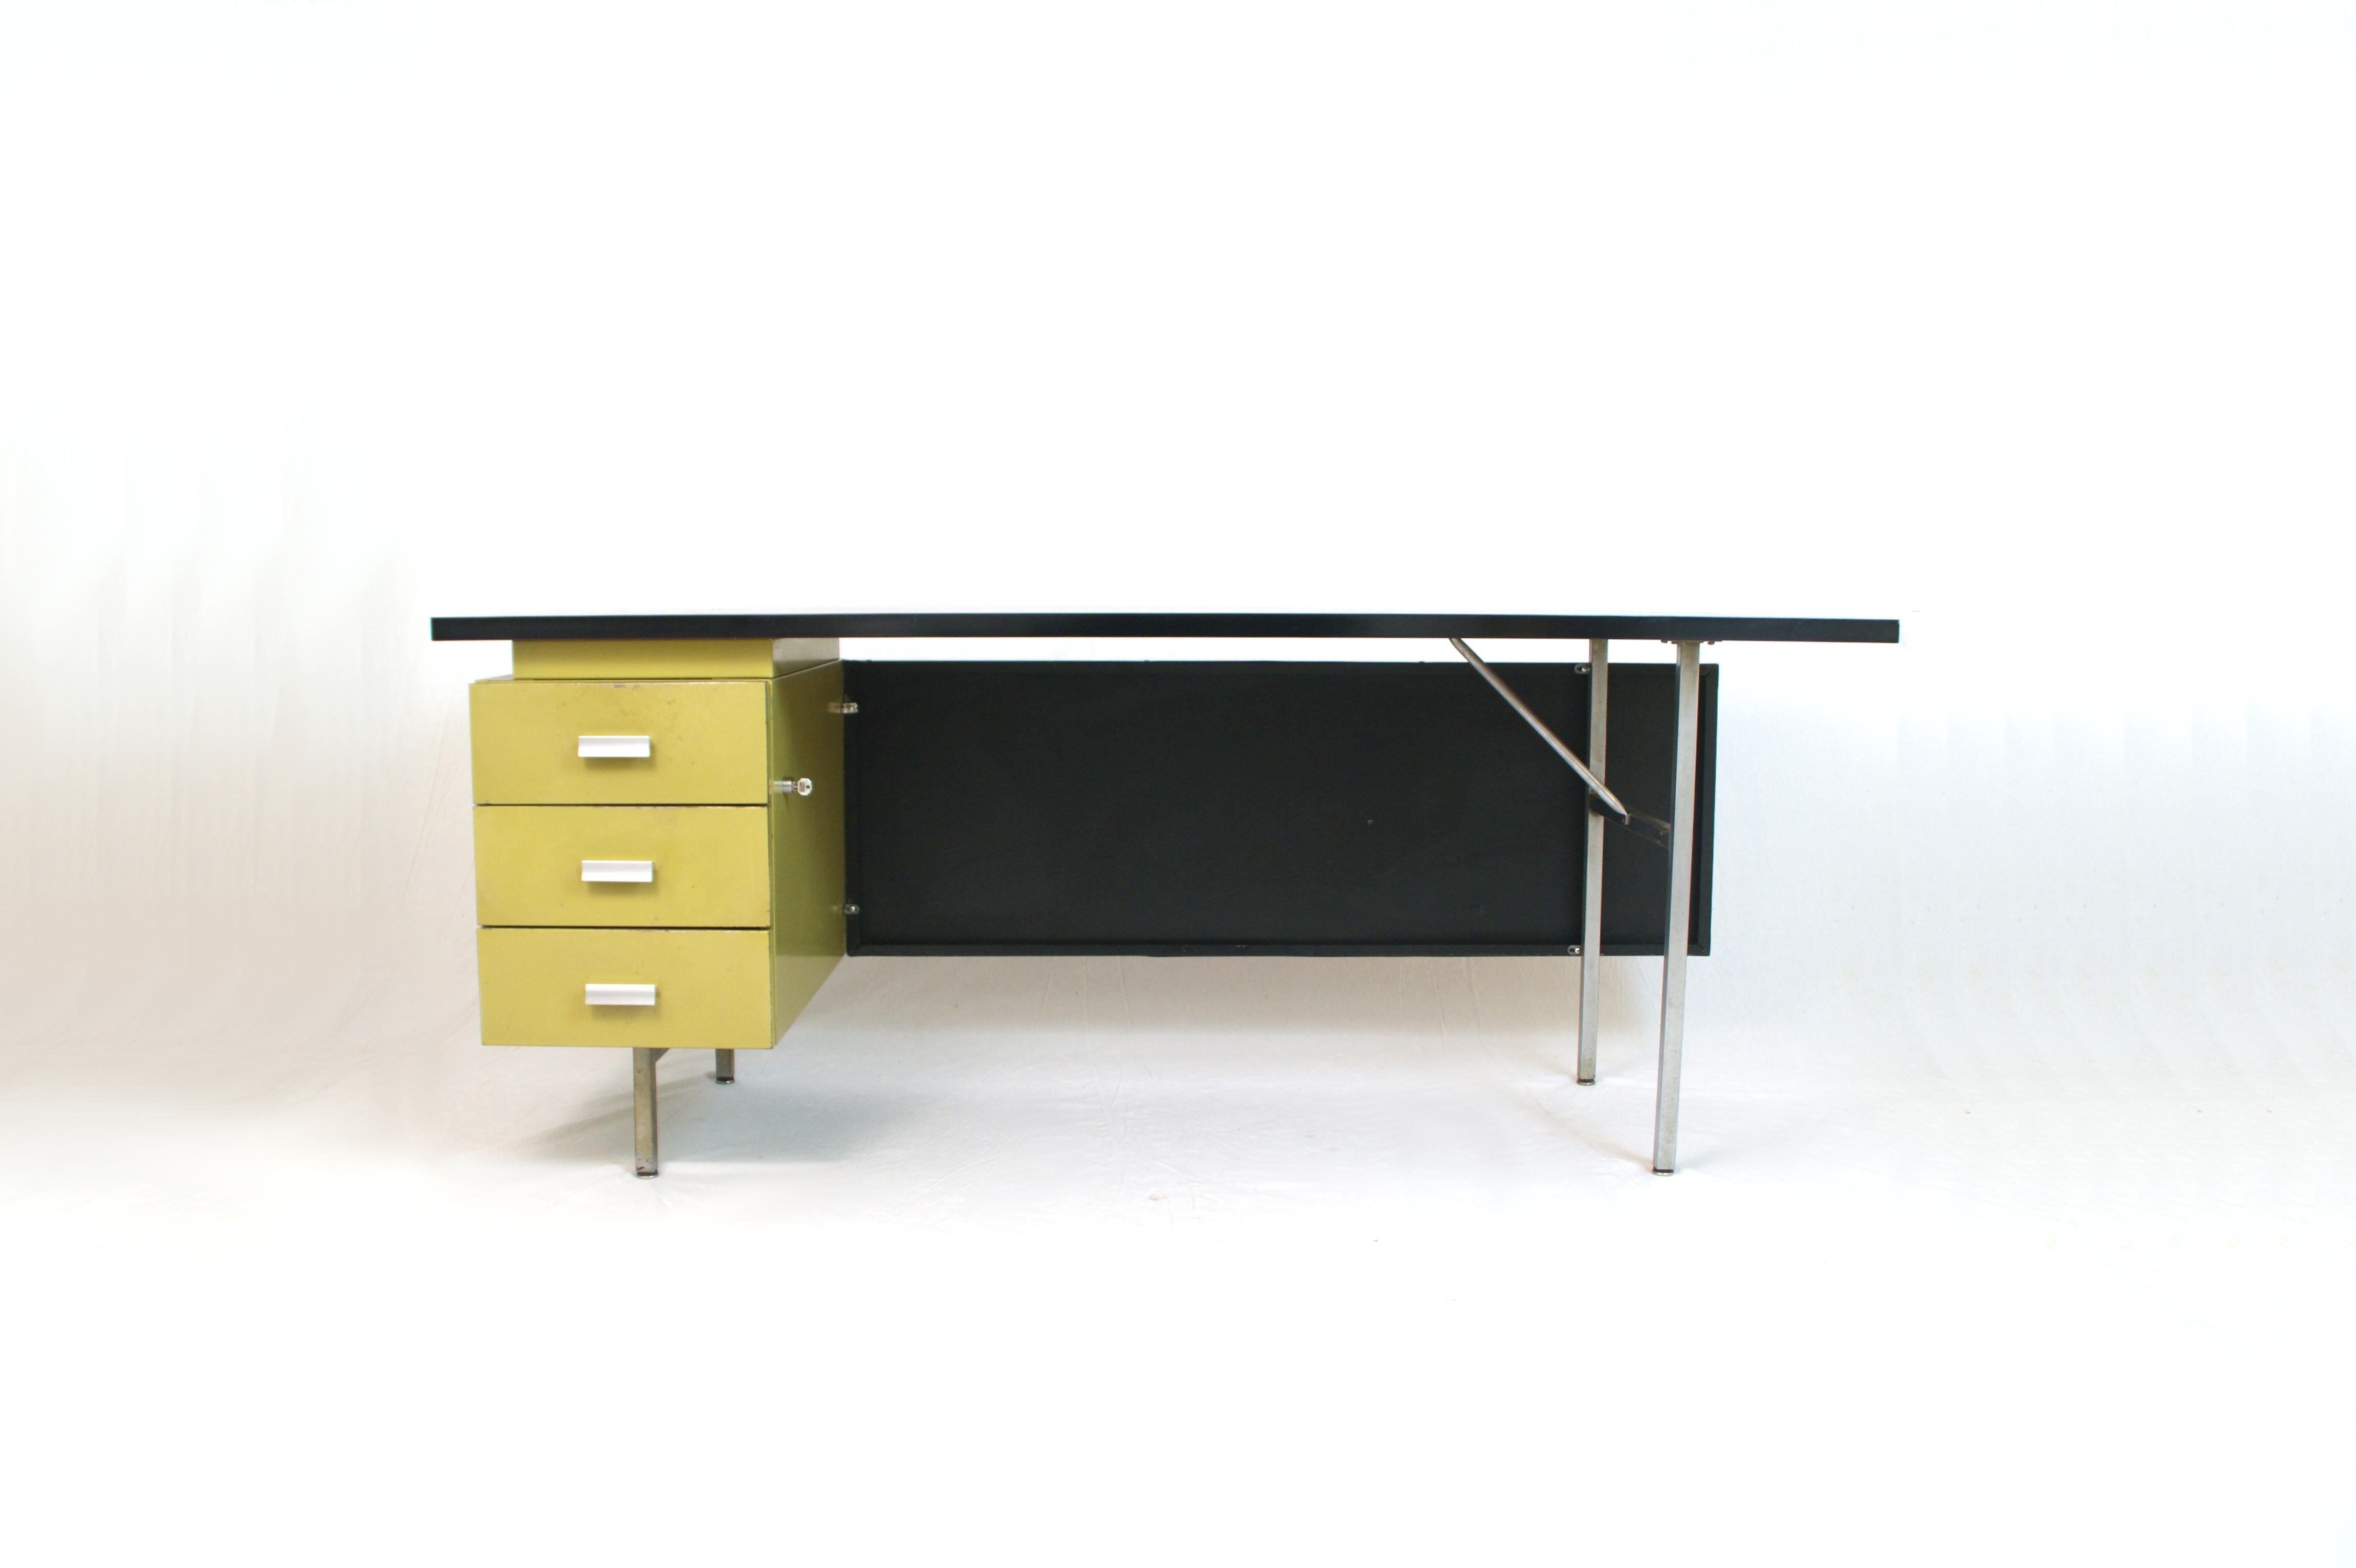 Desk designed by George Nelson in the 1970s produced under license in italy by ICF de padova.
Original condition, preserved.
High-thickness black laminate top, front panel covered in woven raffia fabric and chrome details, pale green lacquered metal